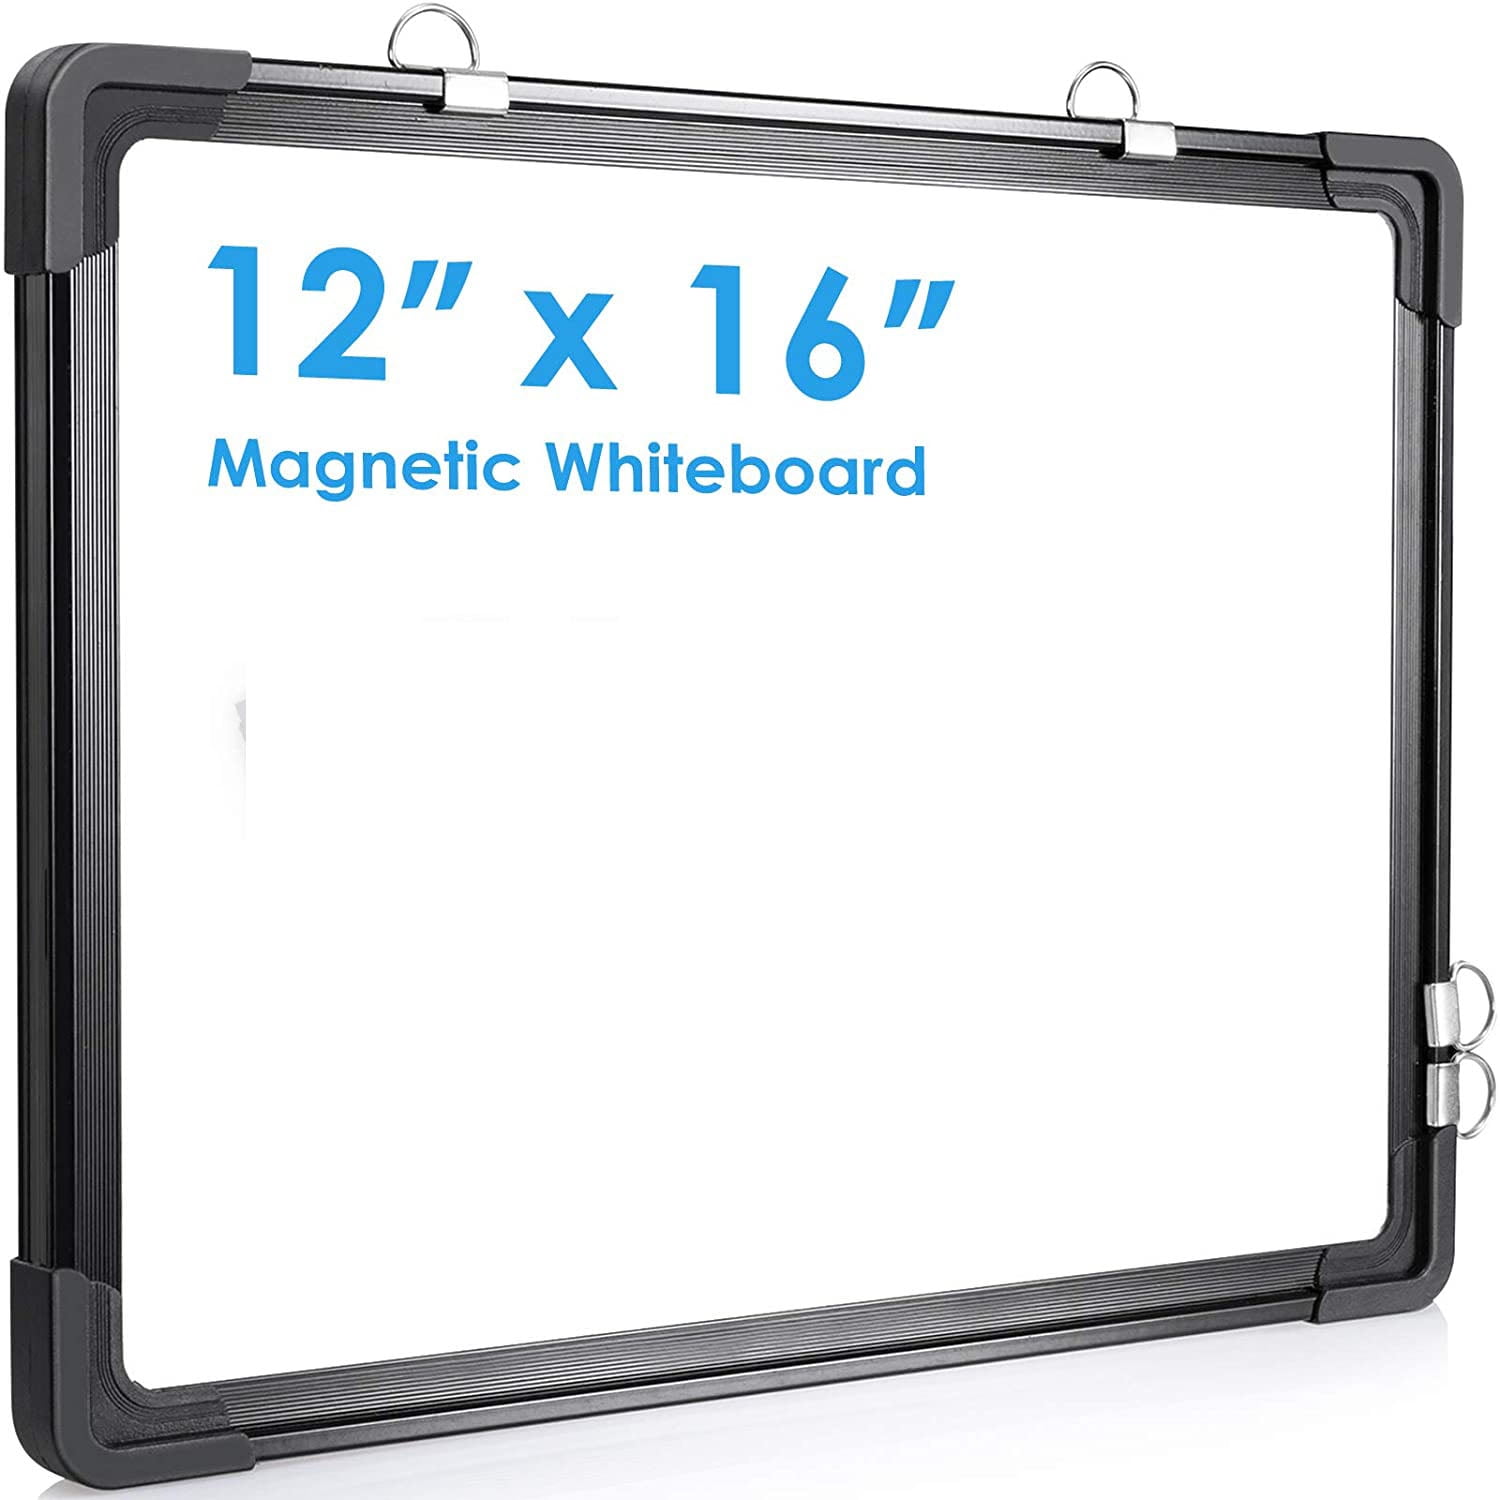 JILoffice Large Foldable White Board 60x40 Inches, Dry Erase Magnetic White Board, Black Aluminum Frame with 2 Detachable Marker Tray Wall Mounted